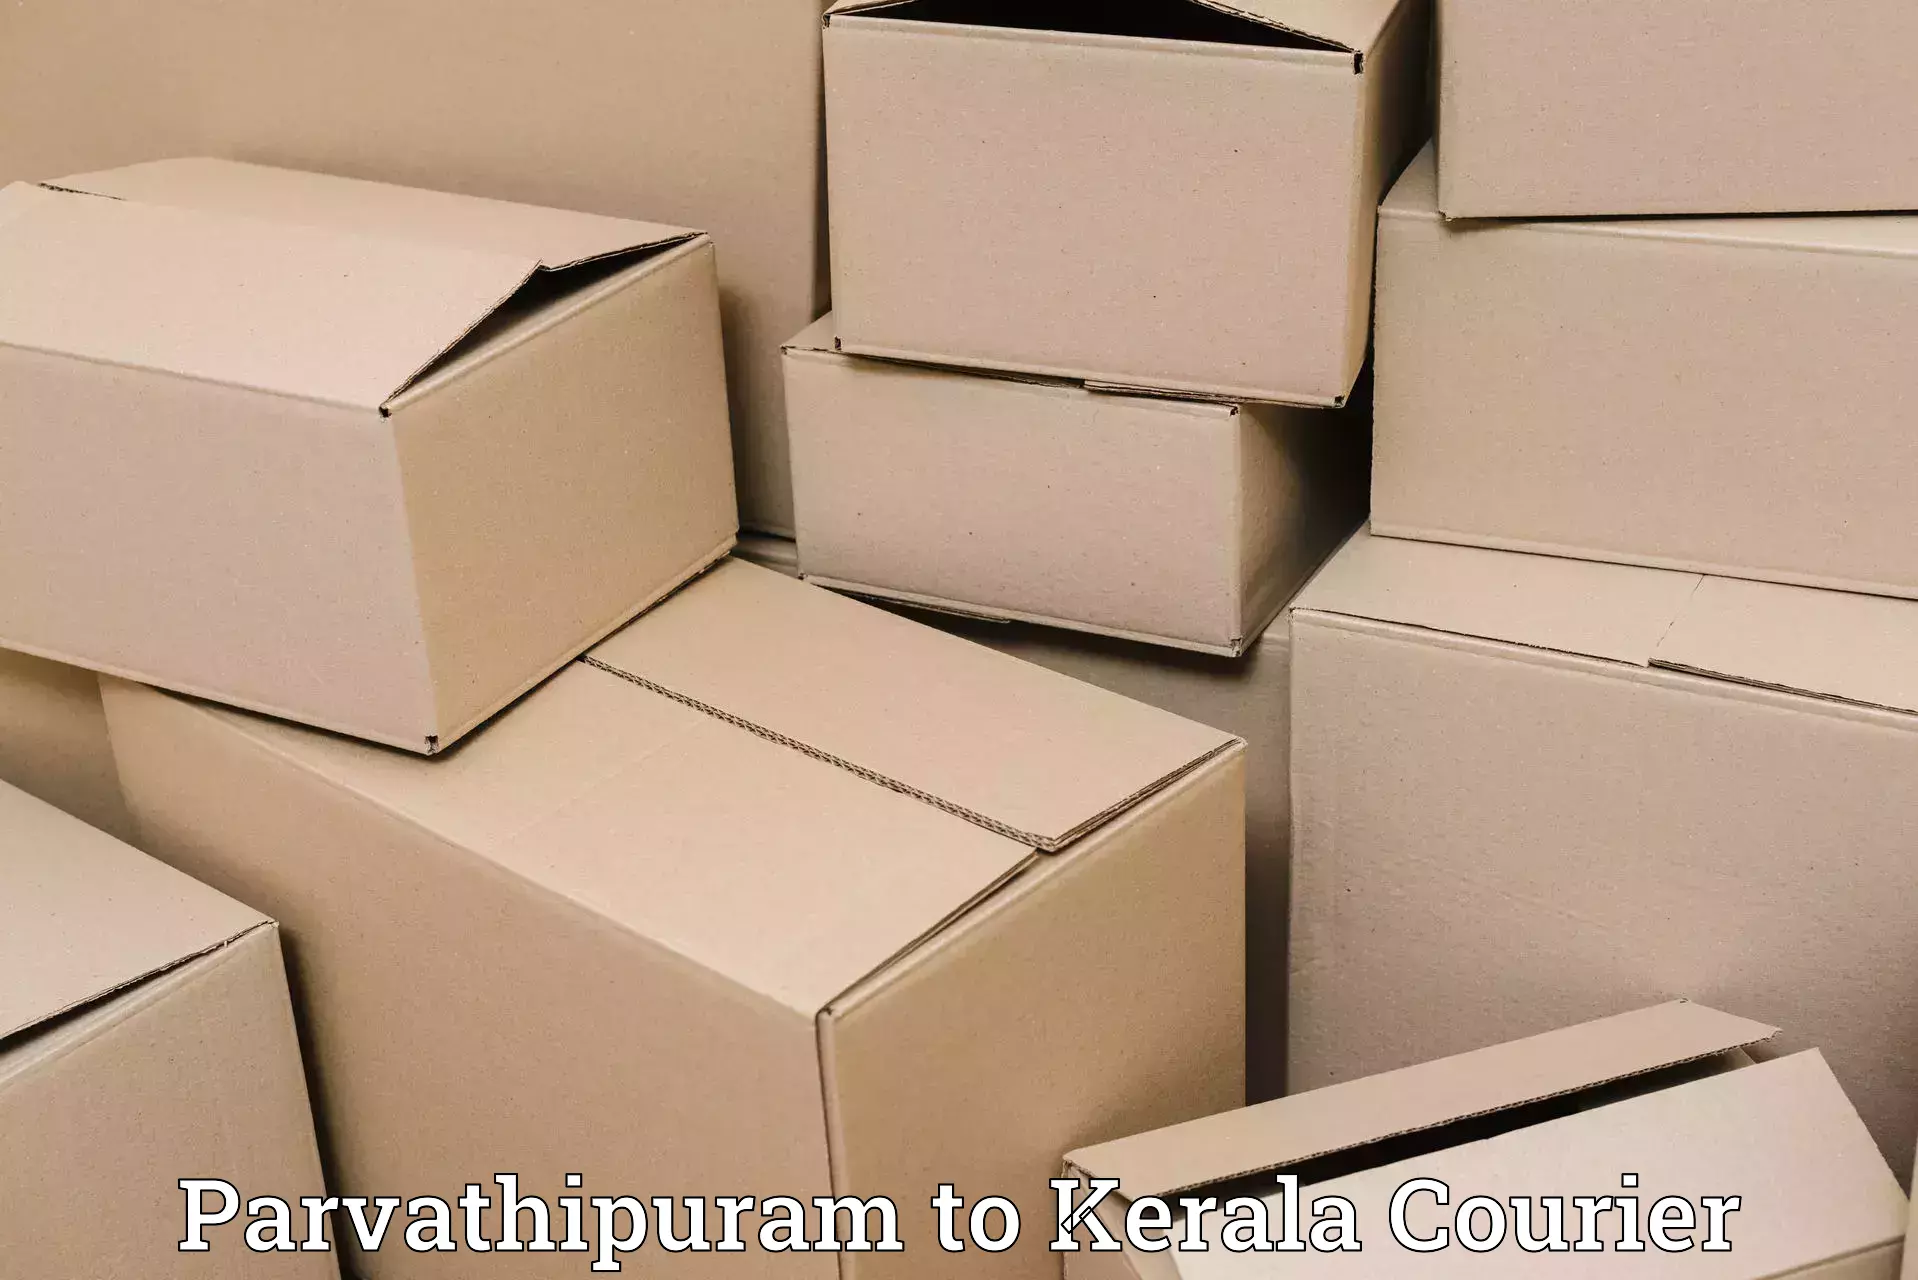 Customizable delivery plans Parvathipuram to Kerala